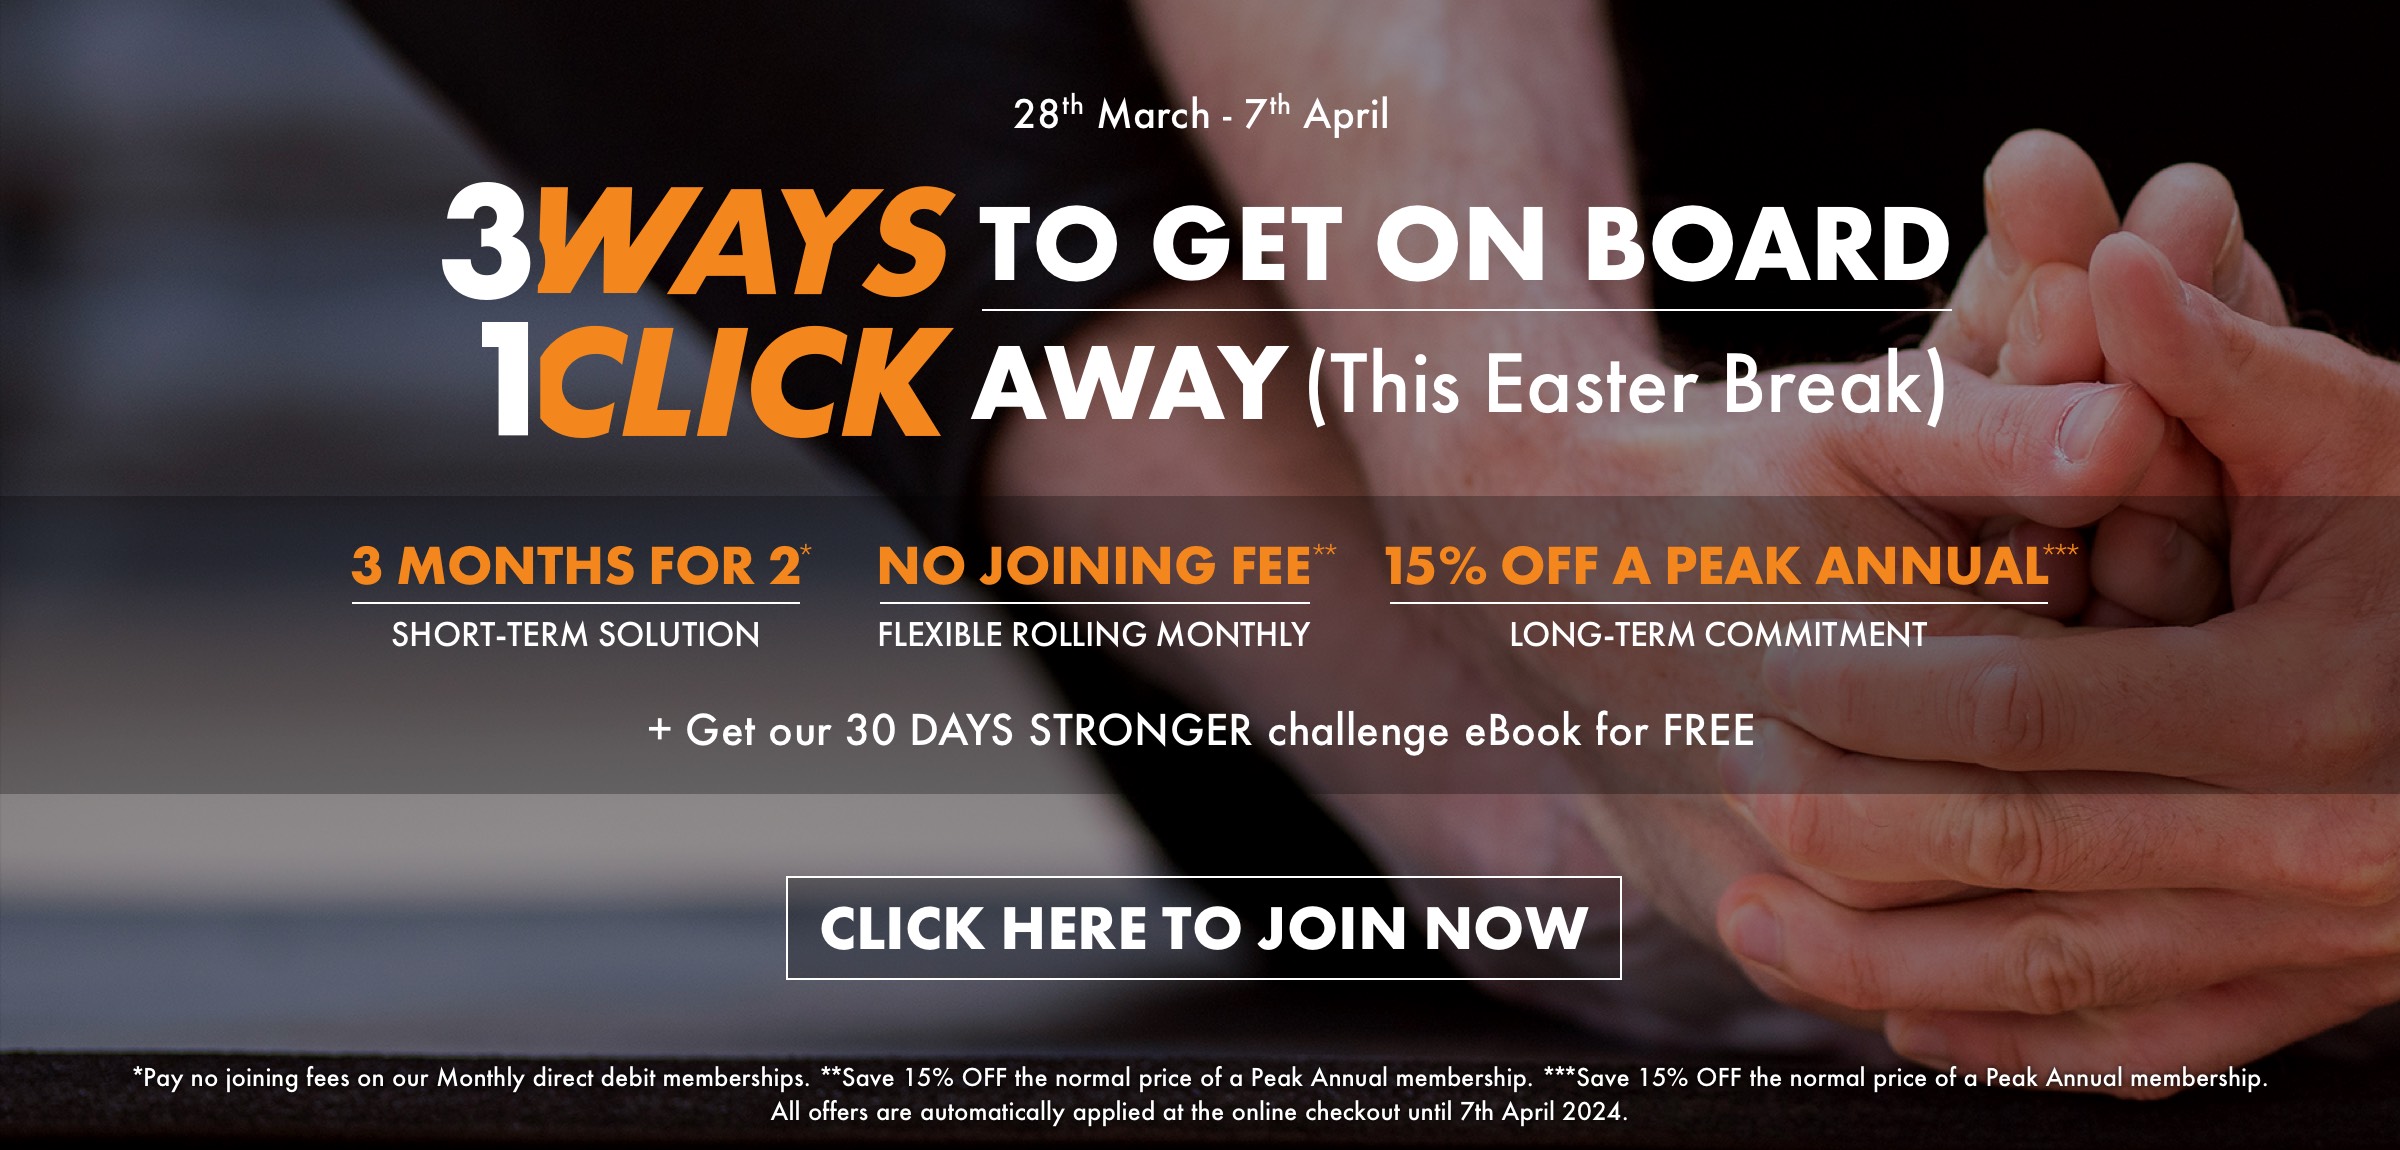 3 Ways to Get On Board - Gym Offers Easter